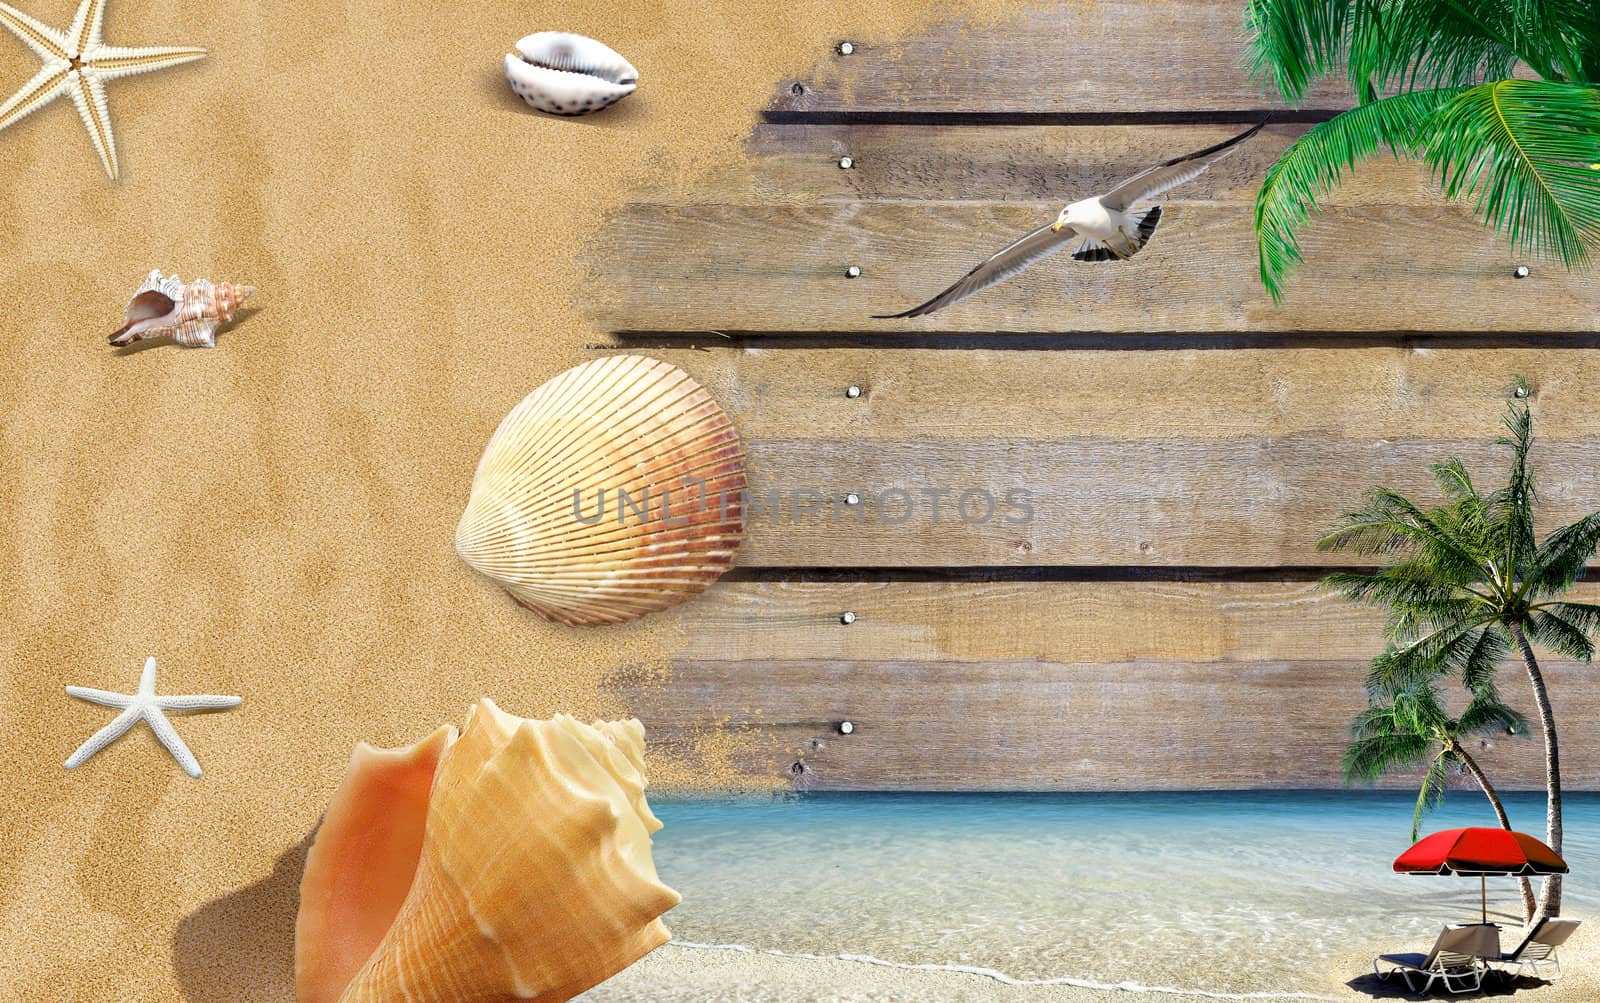 Tropical island with shells, palm trees, ocean and beach